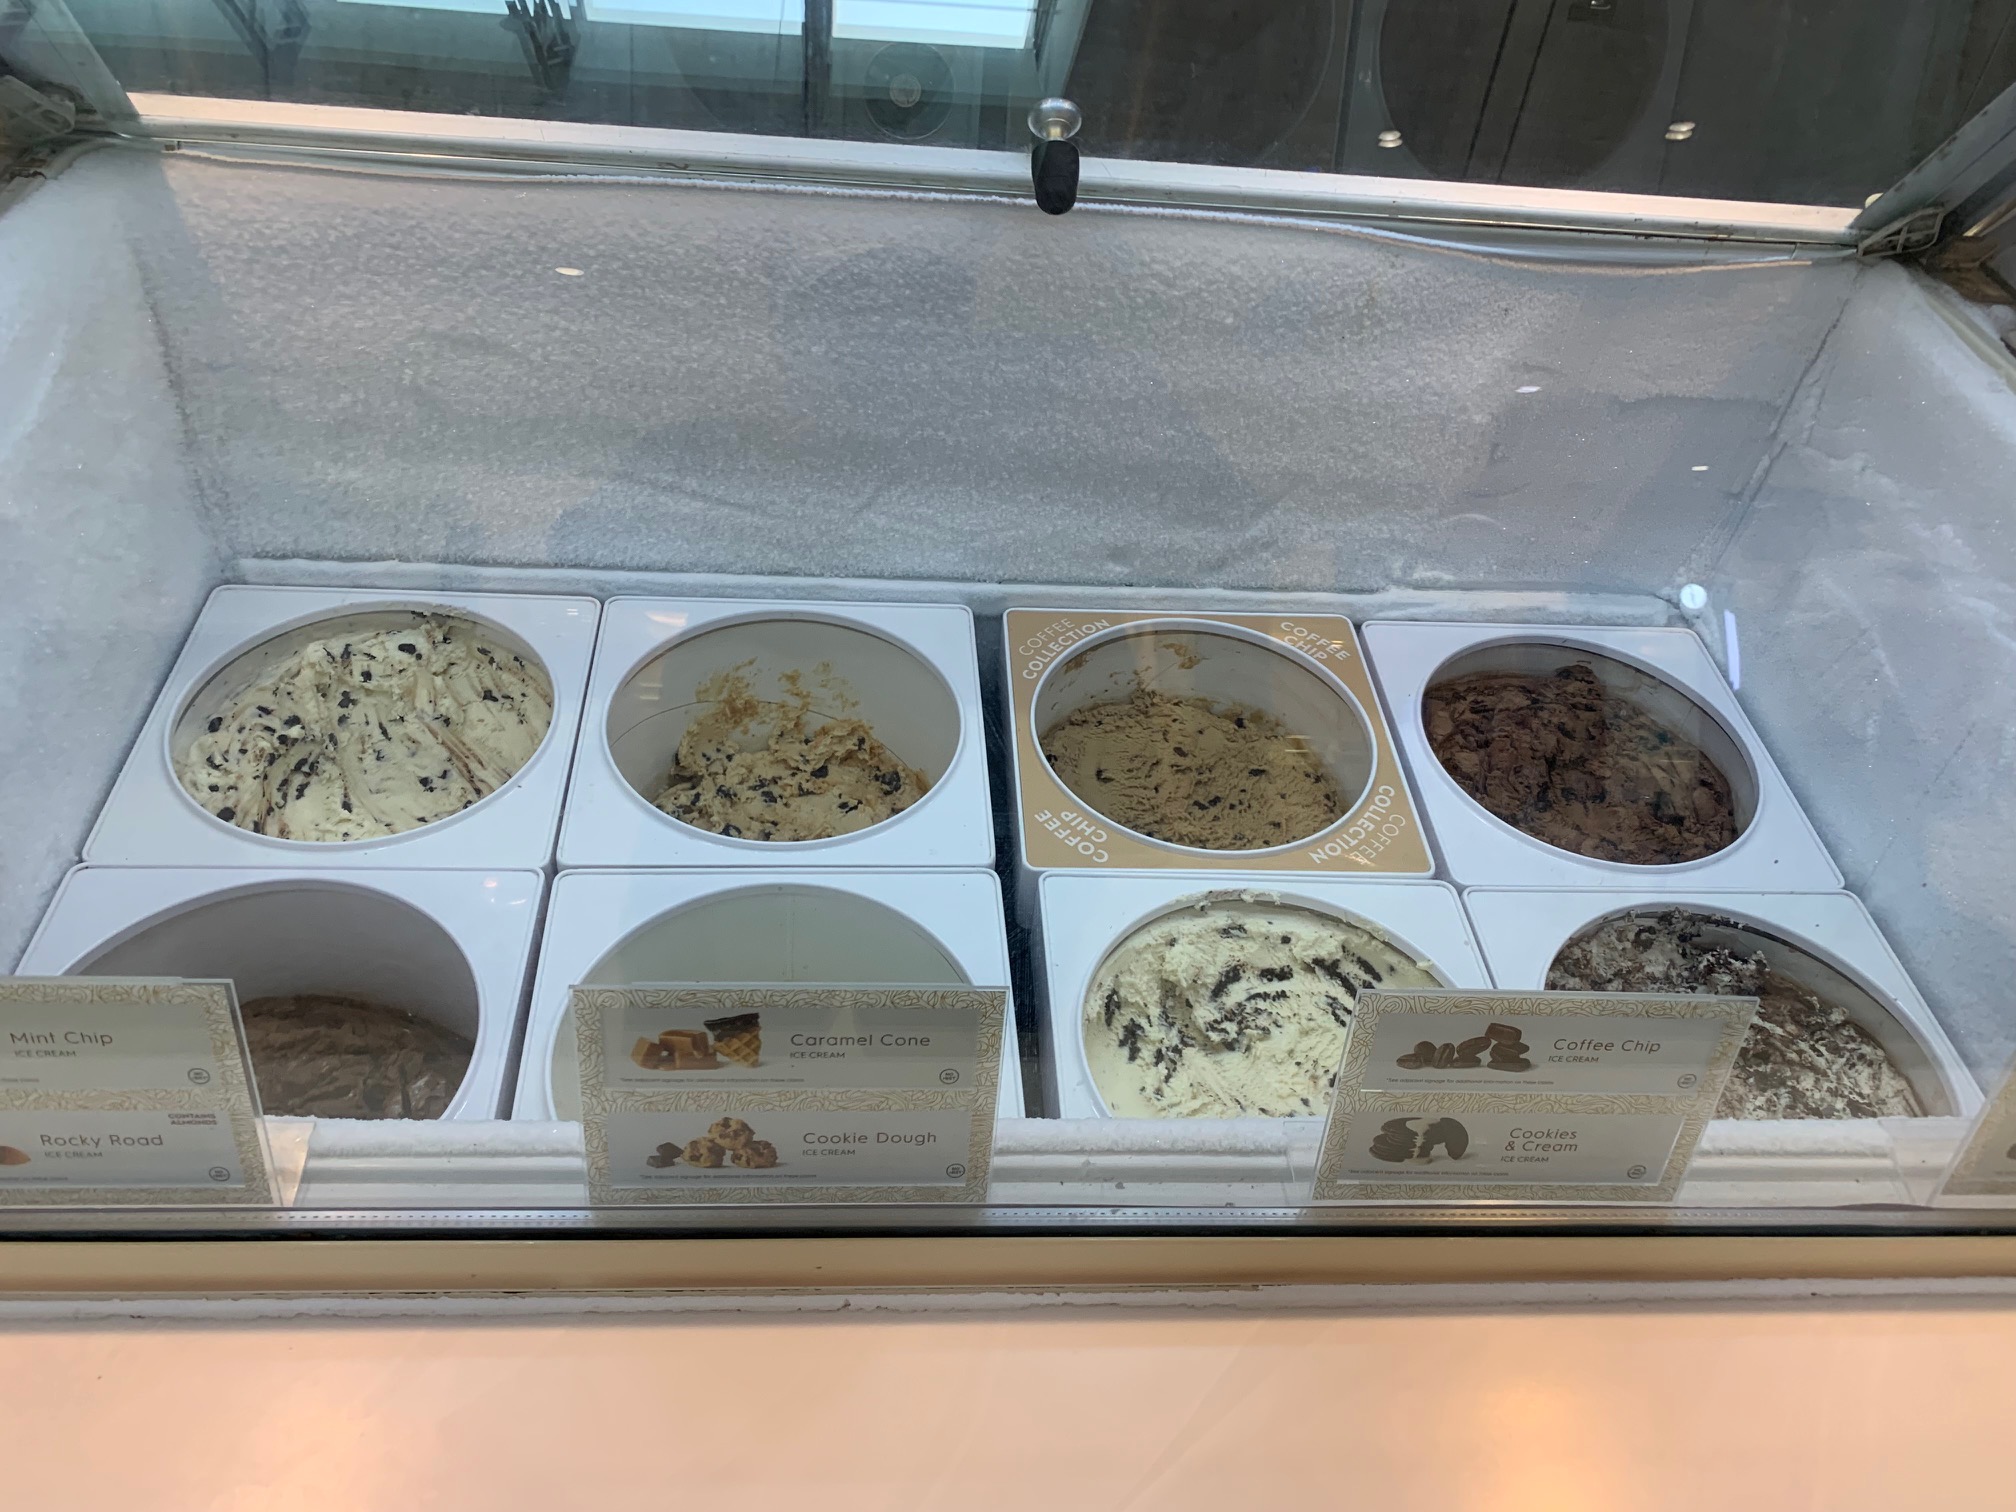 Ice Cream Franchise for sale in NY